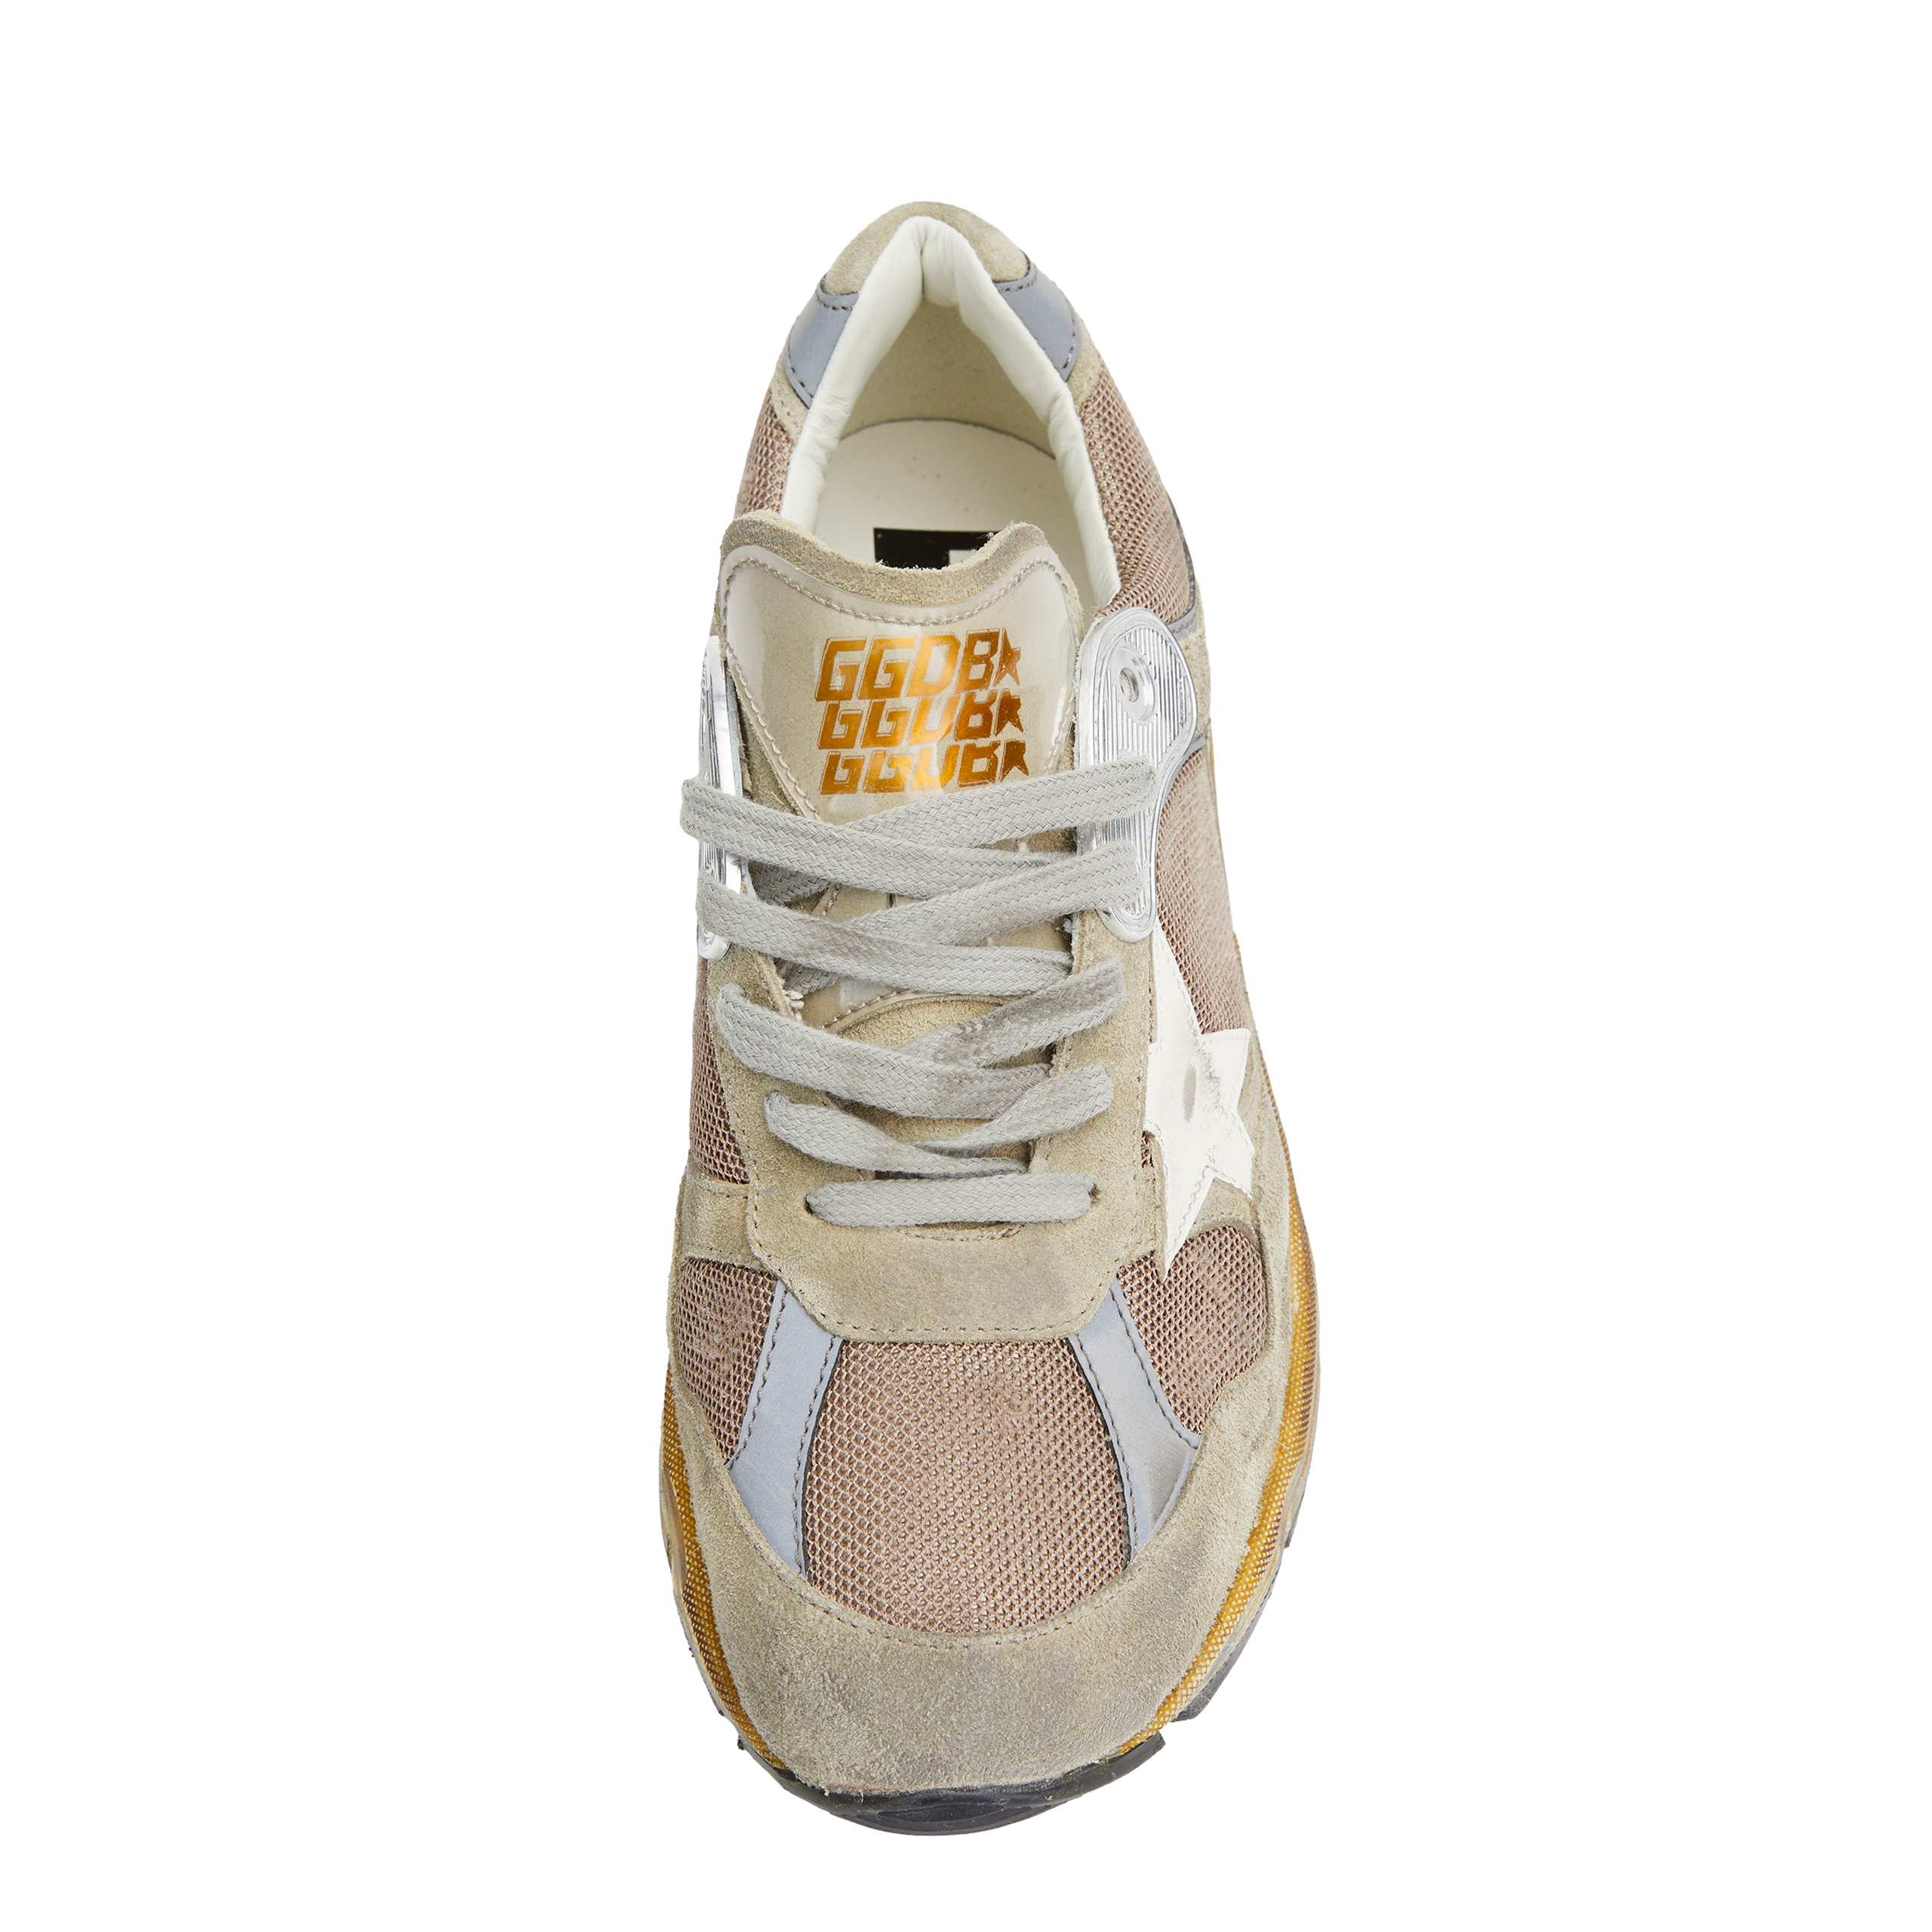 None Golden Goose Deluxe Brand GMF00199/F003271/81751, размер 40;41;42;43;44;45;46 GMF00199/F003271/81751 - фото 4